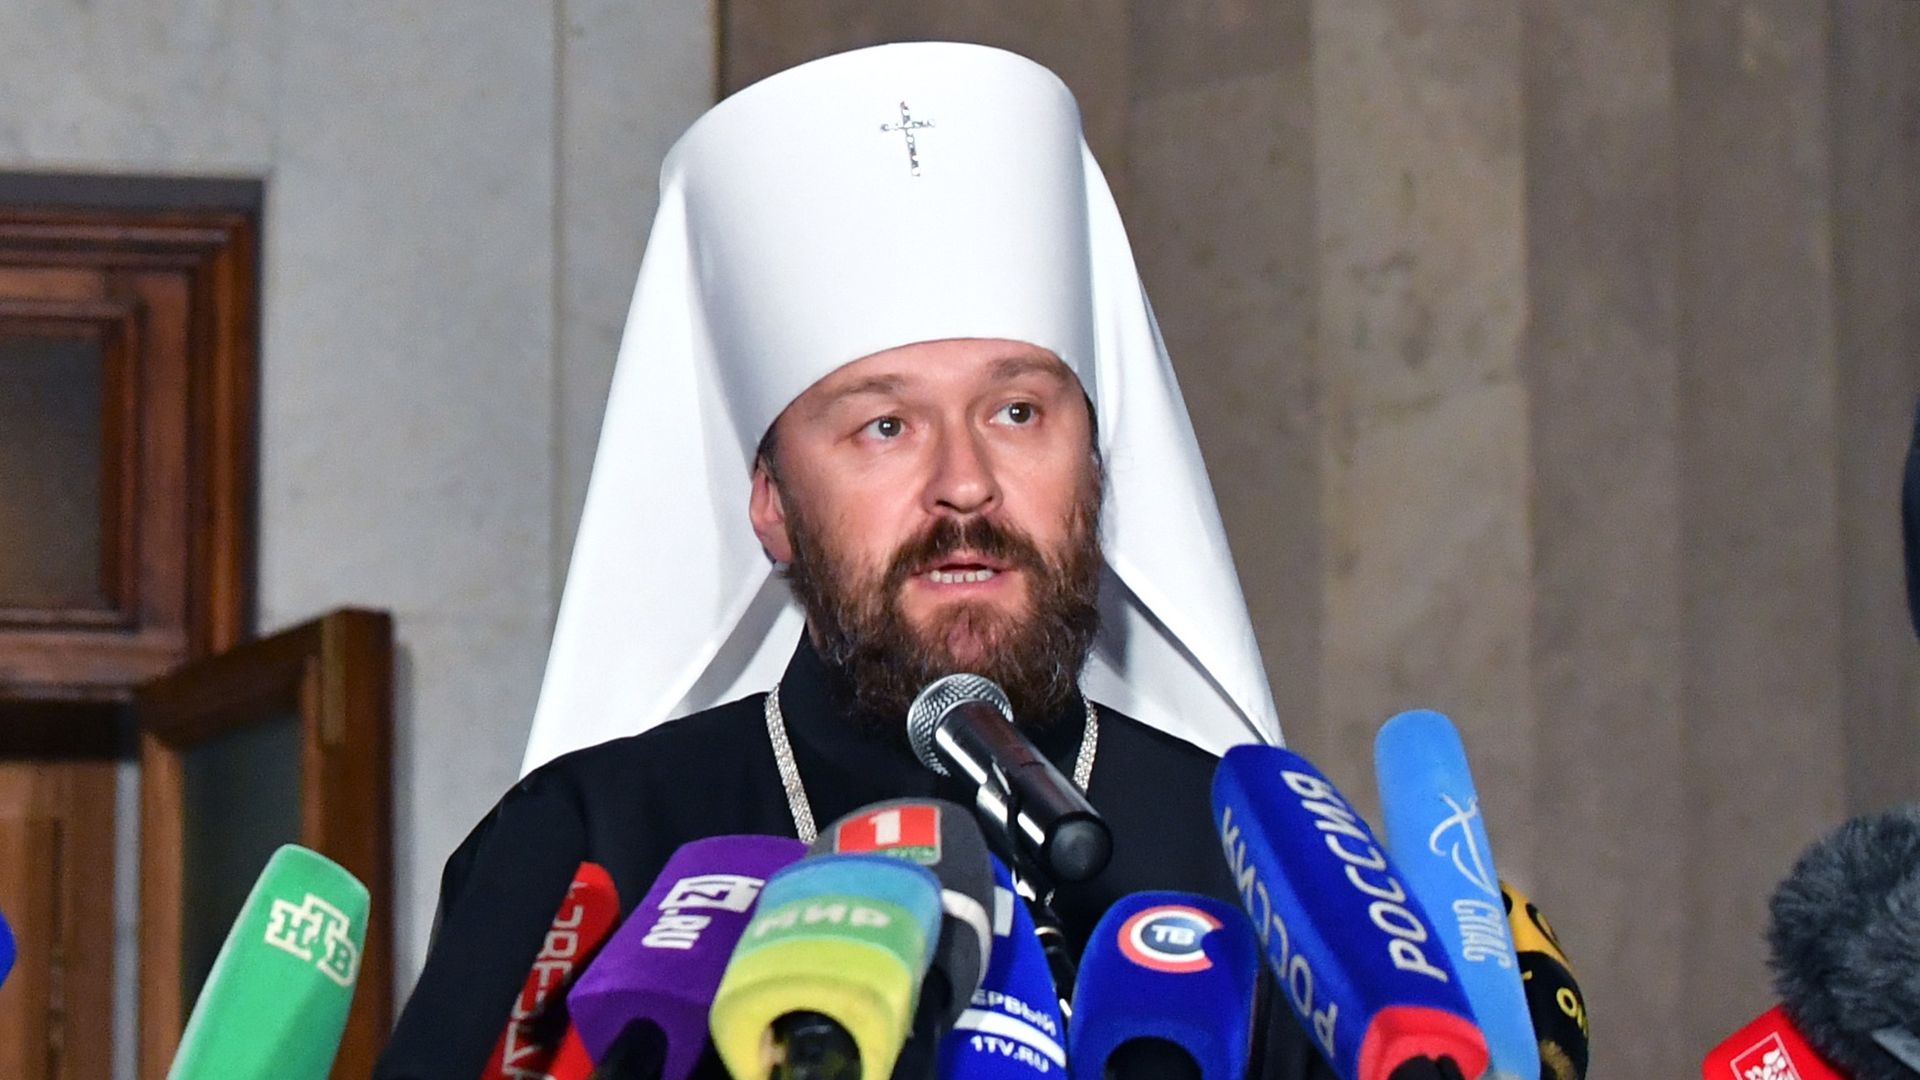 Metropolitan Hilarian, chairman of the Department for External Church Relations of the Moscow Patriarchate. Photo: Viktor Drachev\TASS via Getty Images